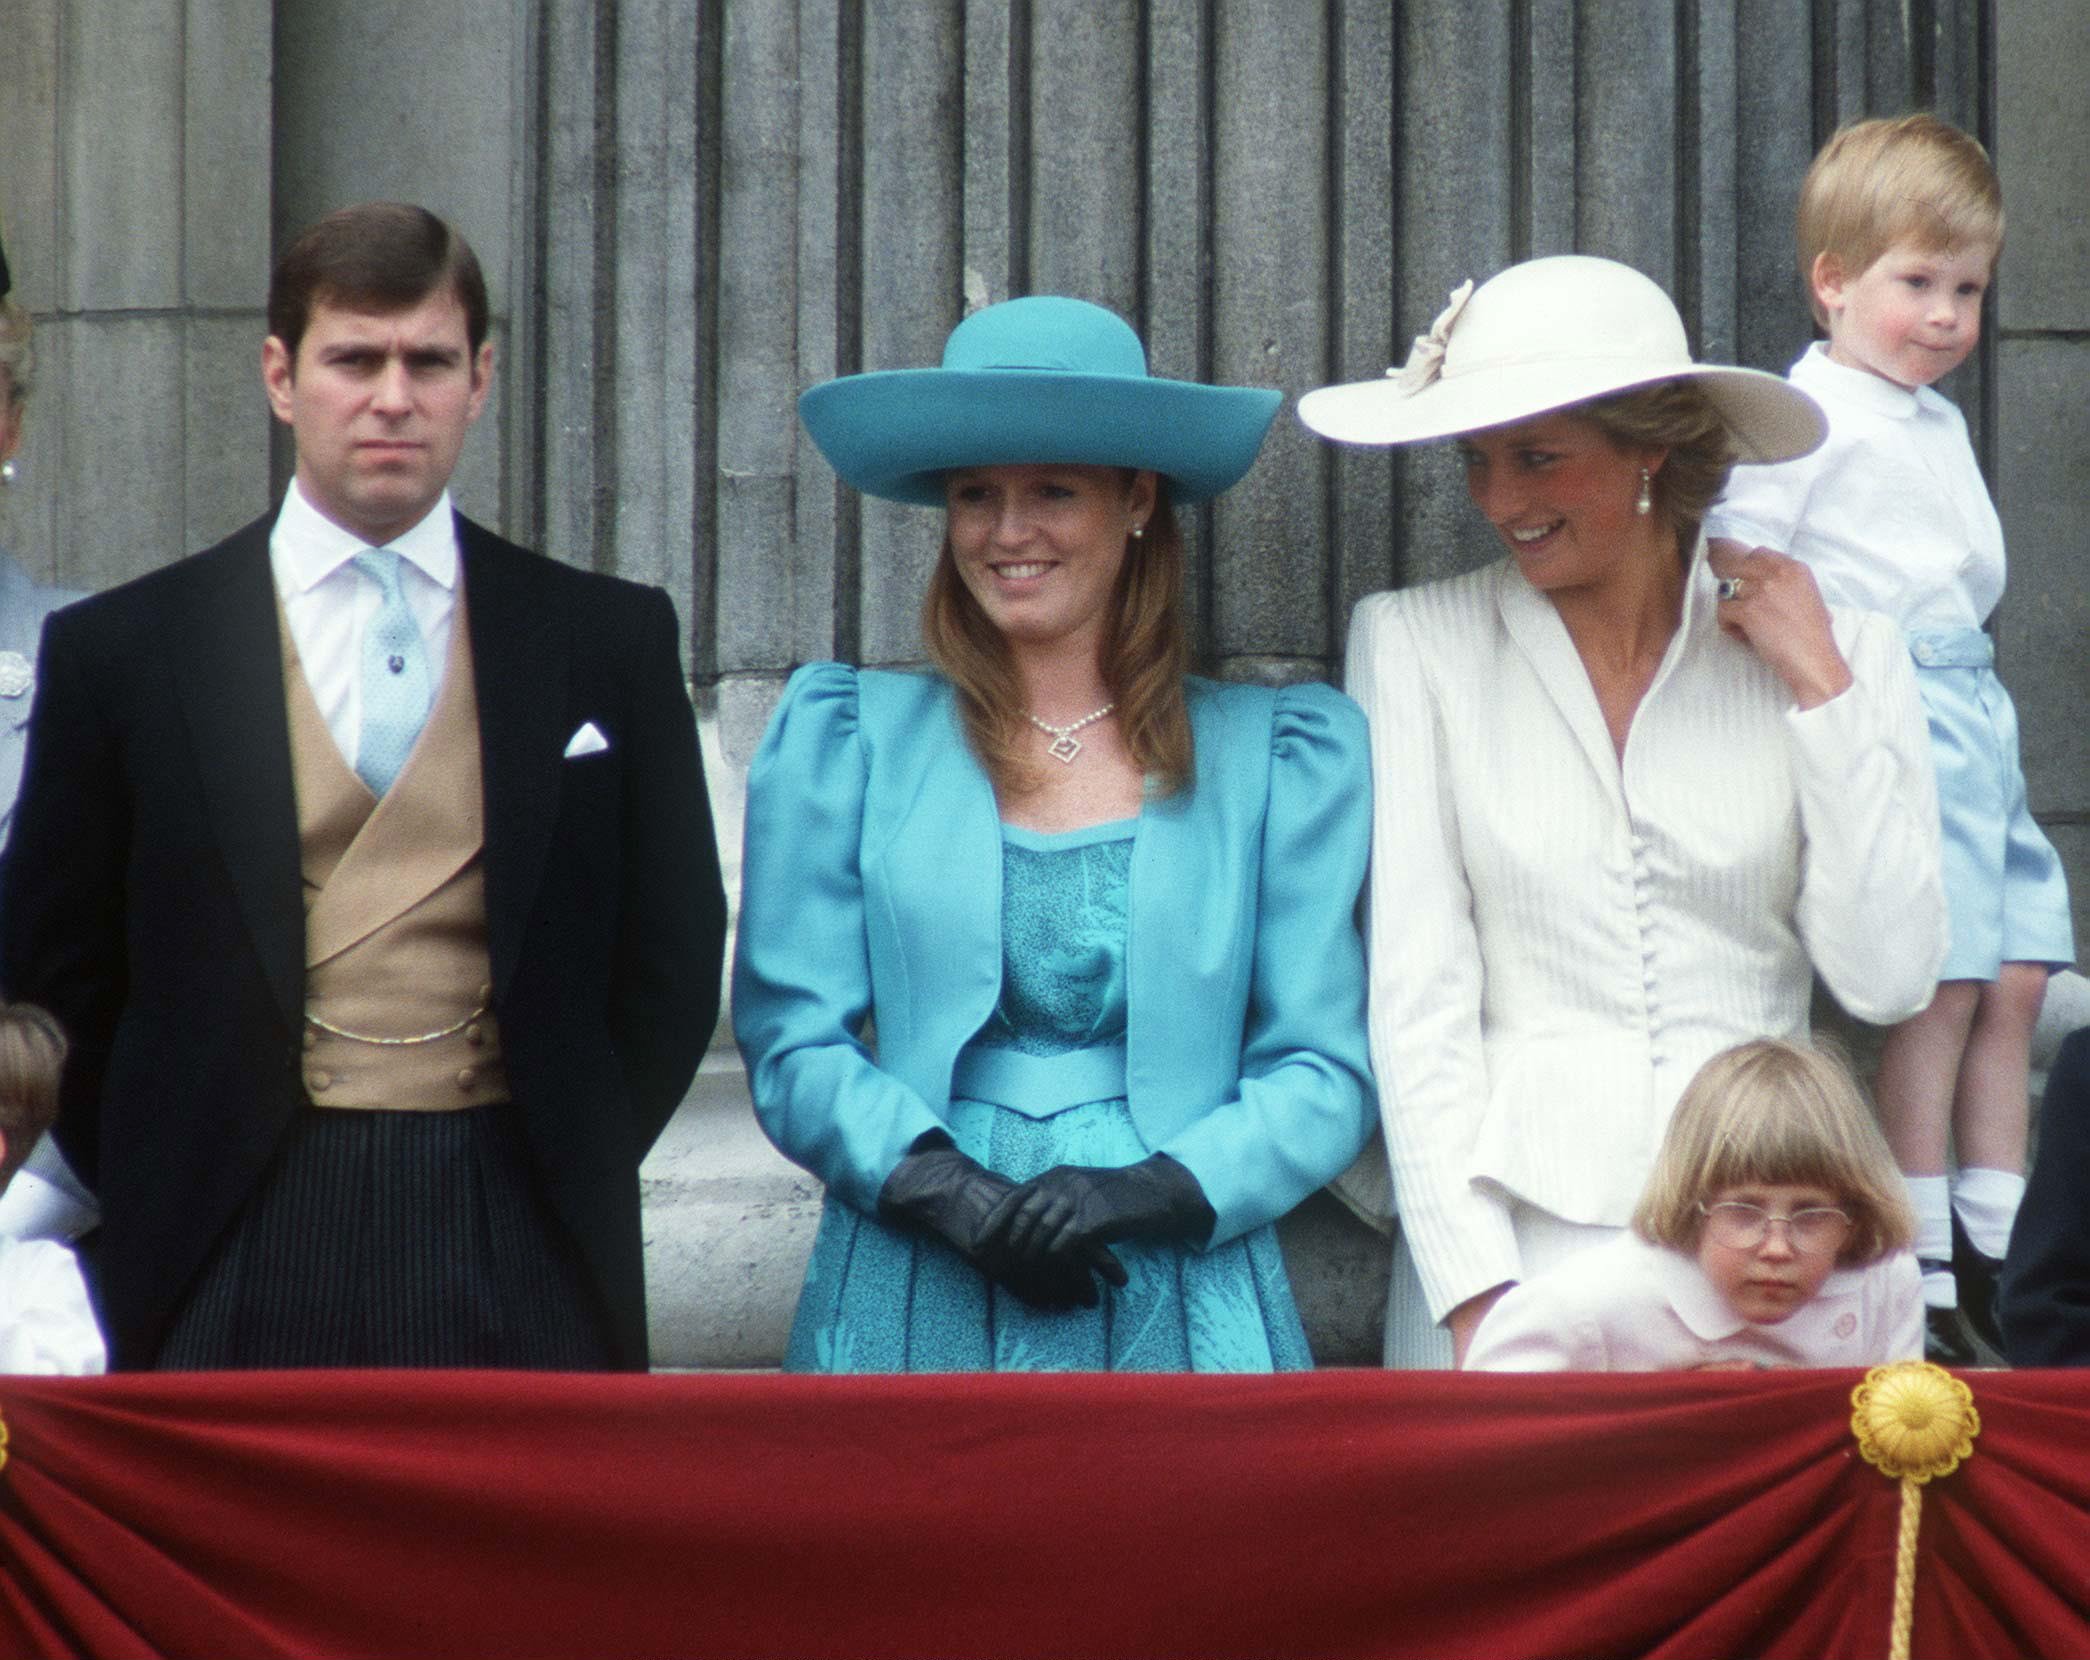 Prince Andrew, Duke of York, Sarah, Duchess of York, Princess Diana and Prince Harry on the balcony of Buckingham Palace for Trooping The Color. / Source: Getty Images